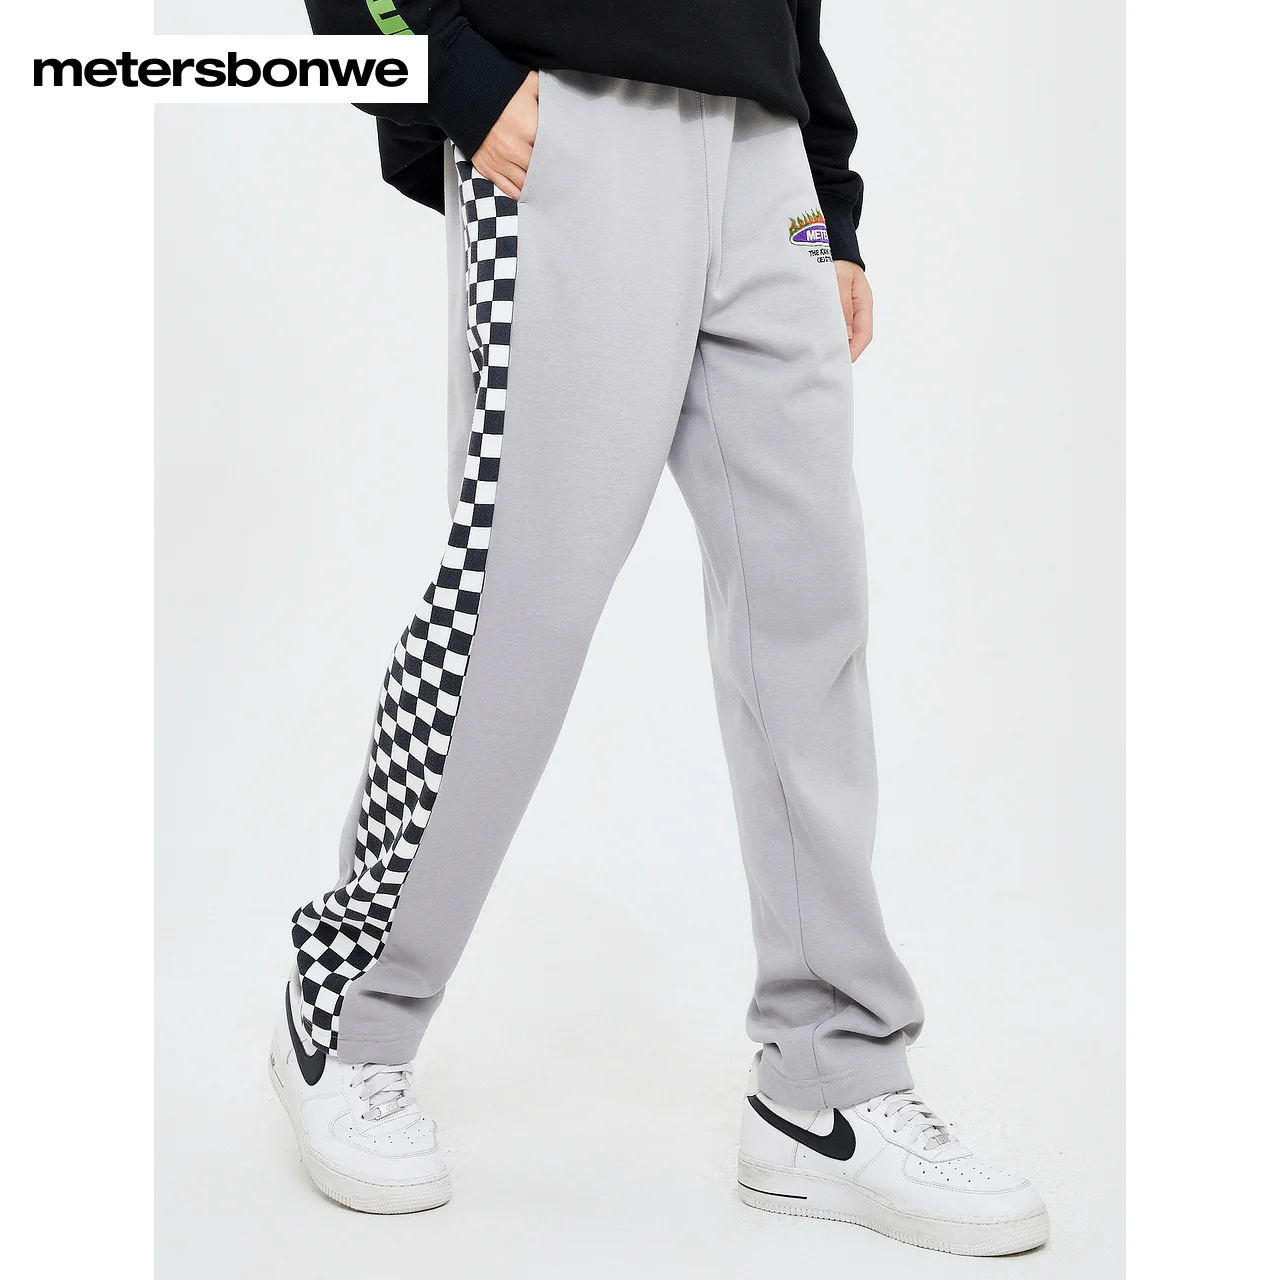 Metersbonwe Fleece Casual Pants Men 2022 Winter New Checkerboard Stitching Knitted Ttrousers Gray Popular Straight pant Brand